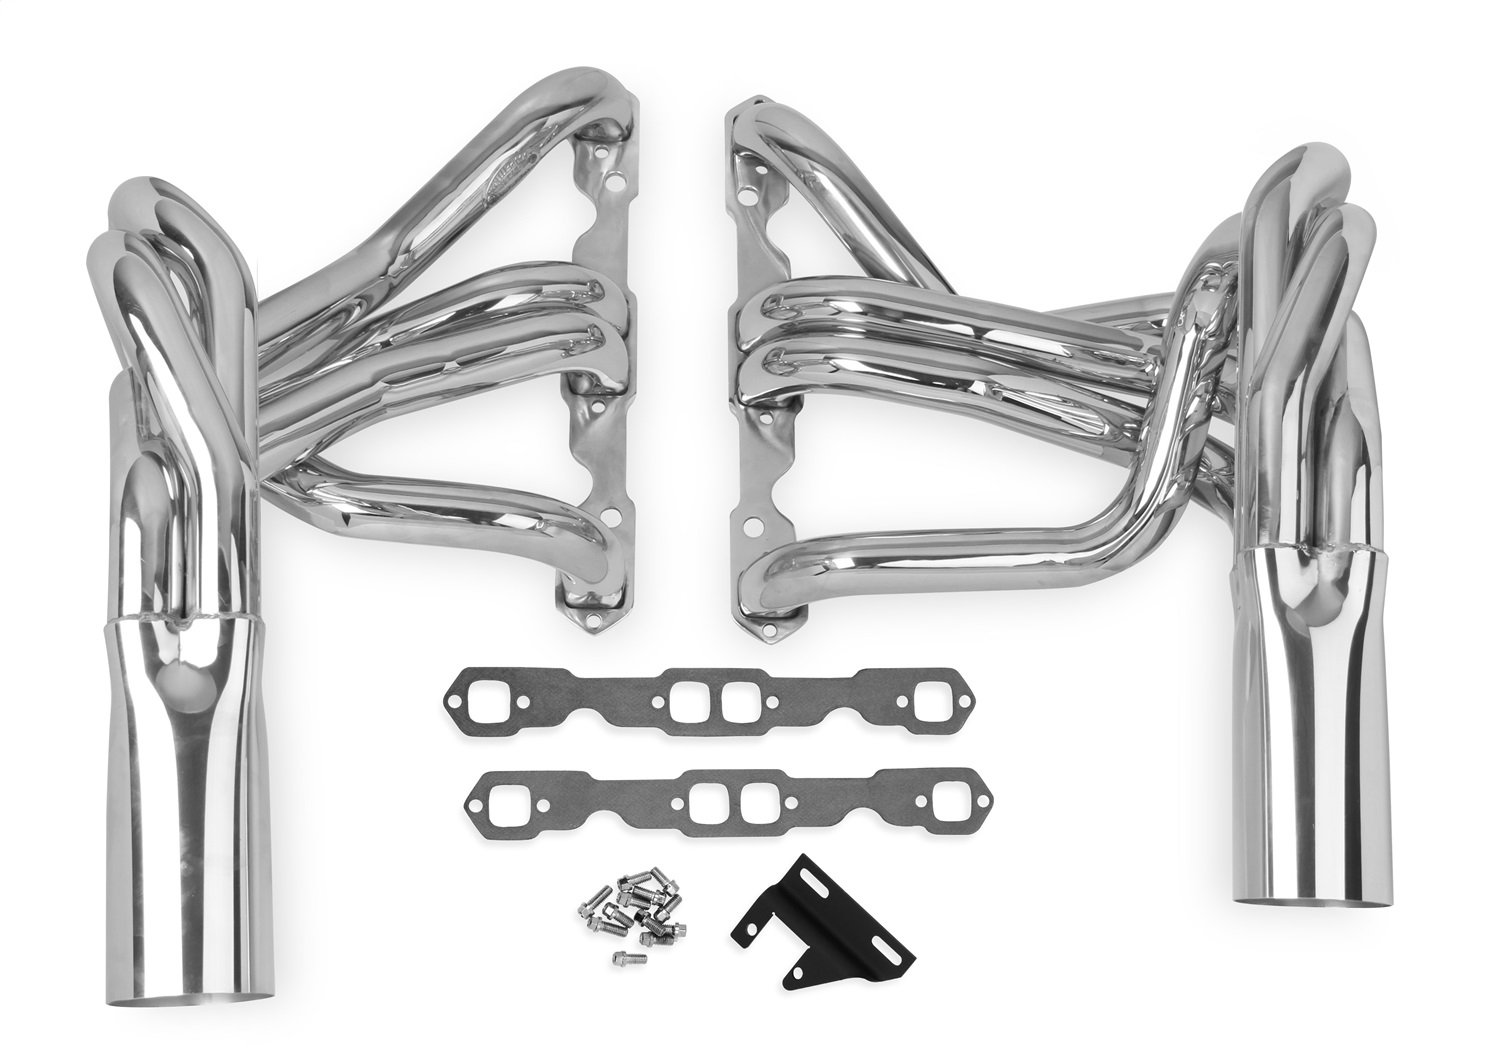 Super Comp Sidemount Headers 1963-82 Corvette with Small Block Chevy 265-400